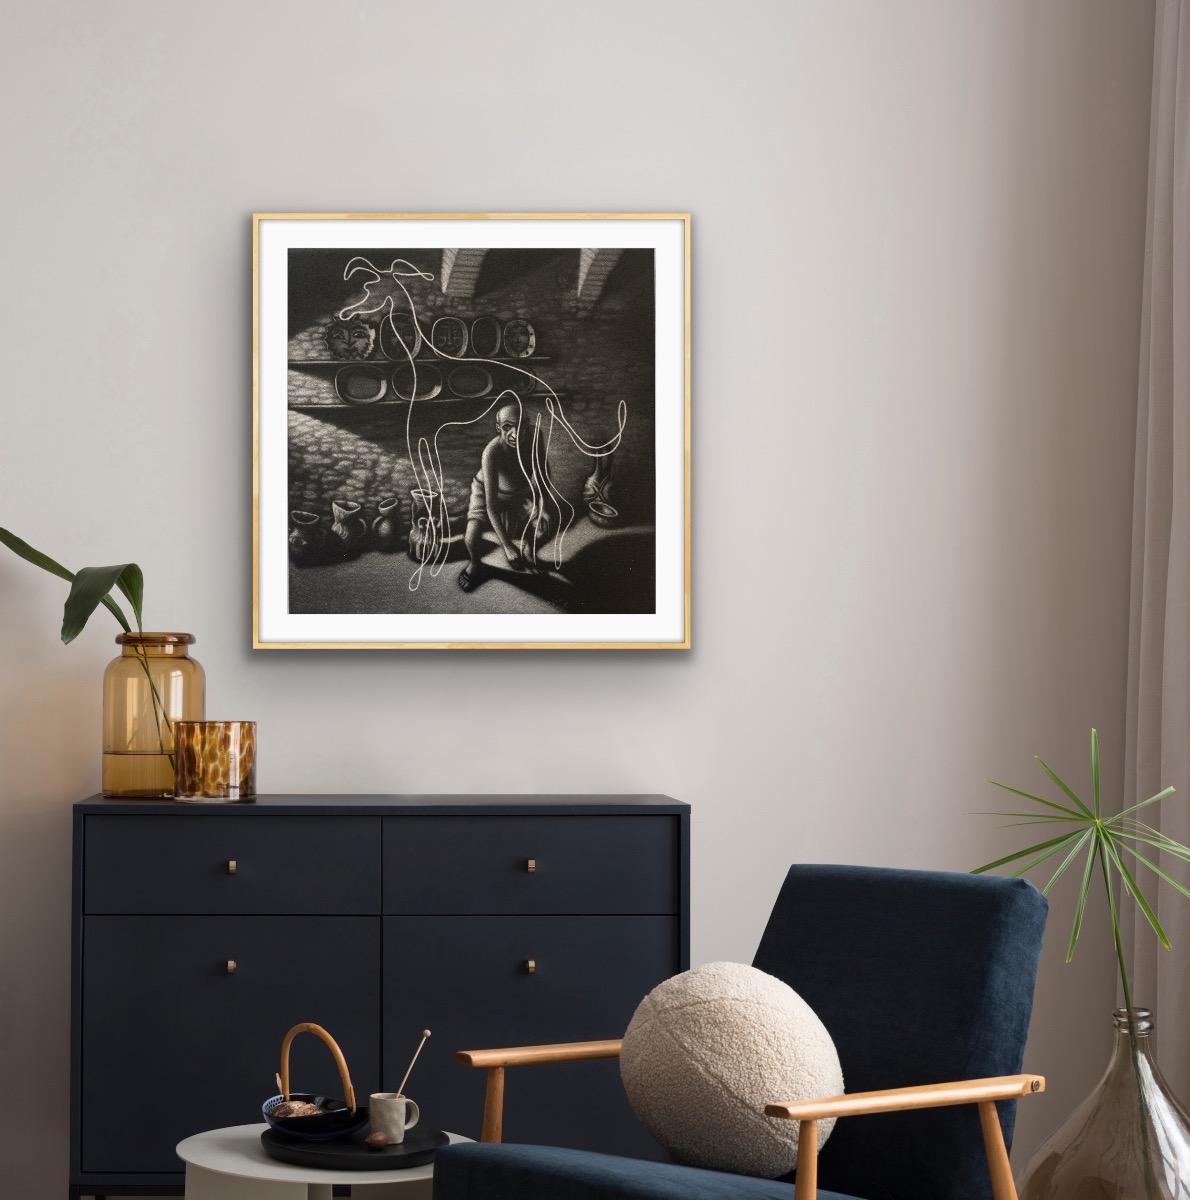 Picasso’s Dog is a limited edition print by Mychael Barratt. It is part of his series of cats and dogs made in the style of famous artists.

Size: H:40 cm x W:38 cm

Additional Information:
Mychael Barratt
Picasso’s Dog
Limited Edition Print
Edition